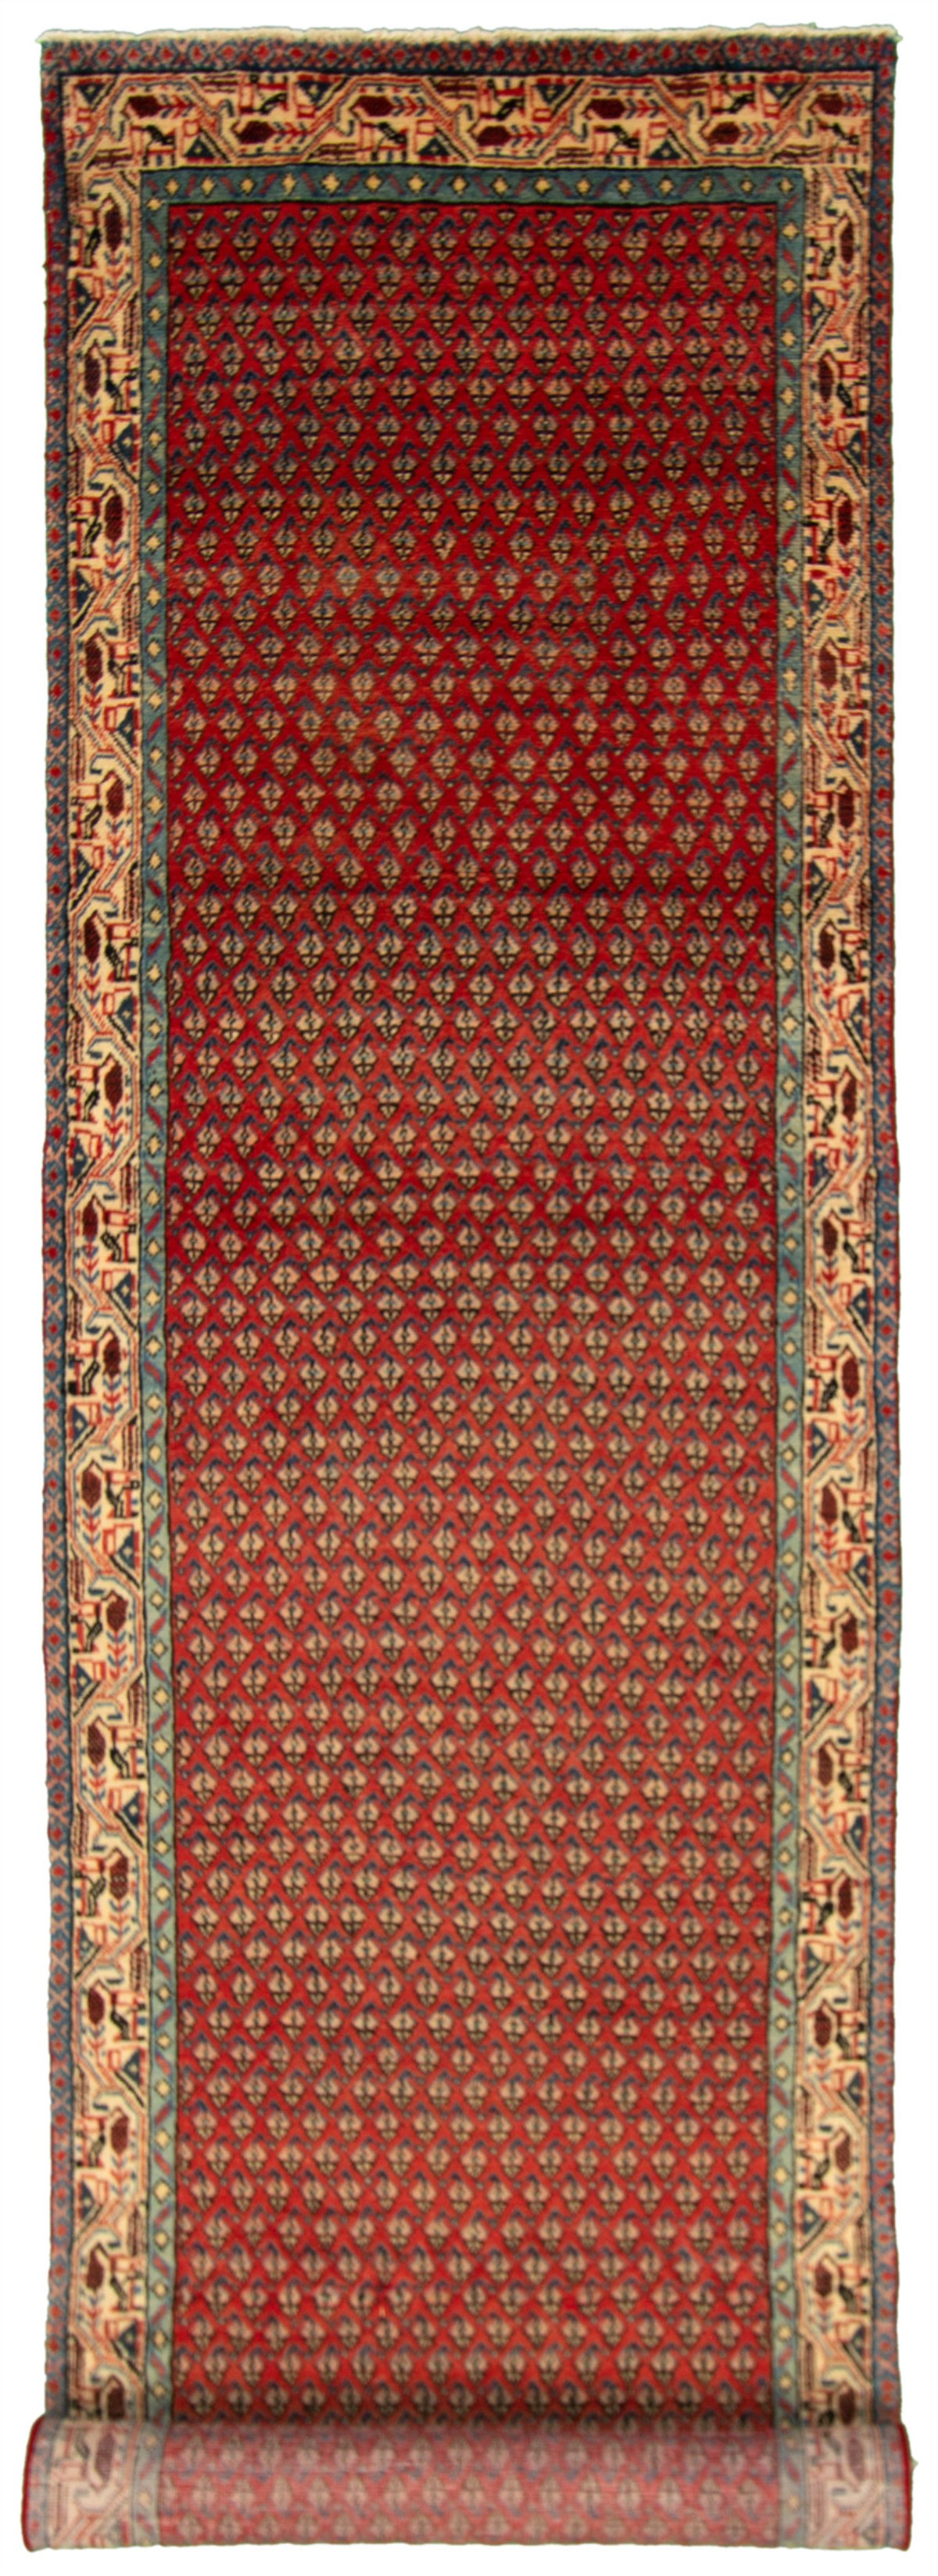 Hand-knotted Arak Red Wool Rug 3'6" x 14'9" Size: 3'6" x 14'9"  